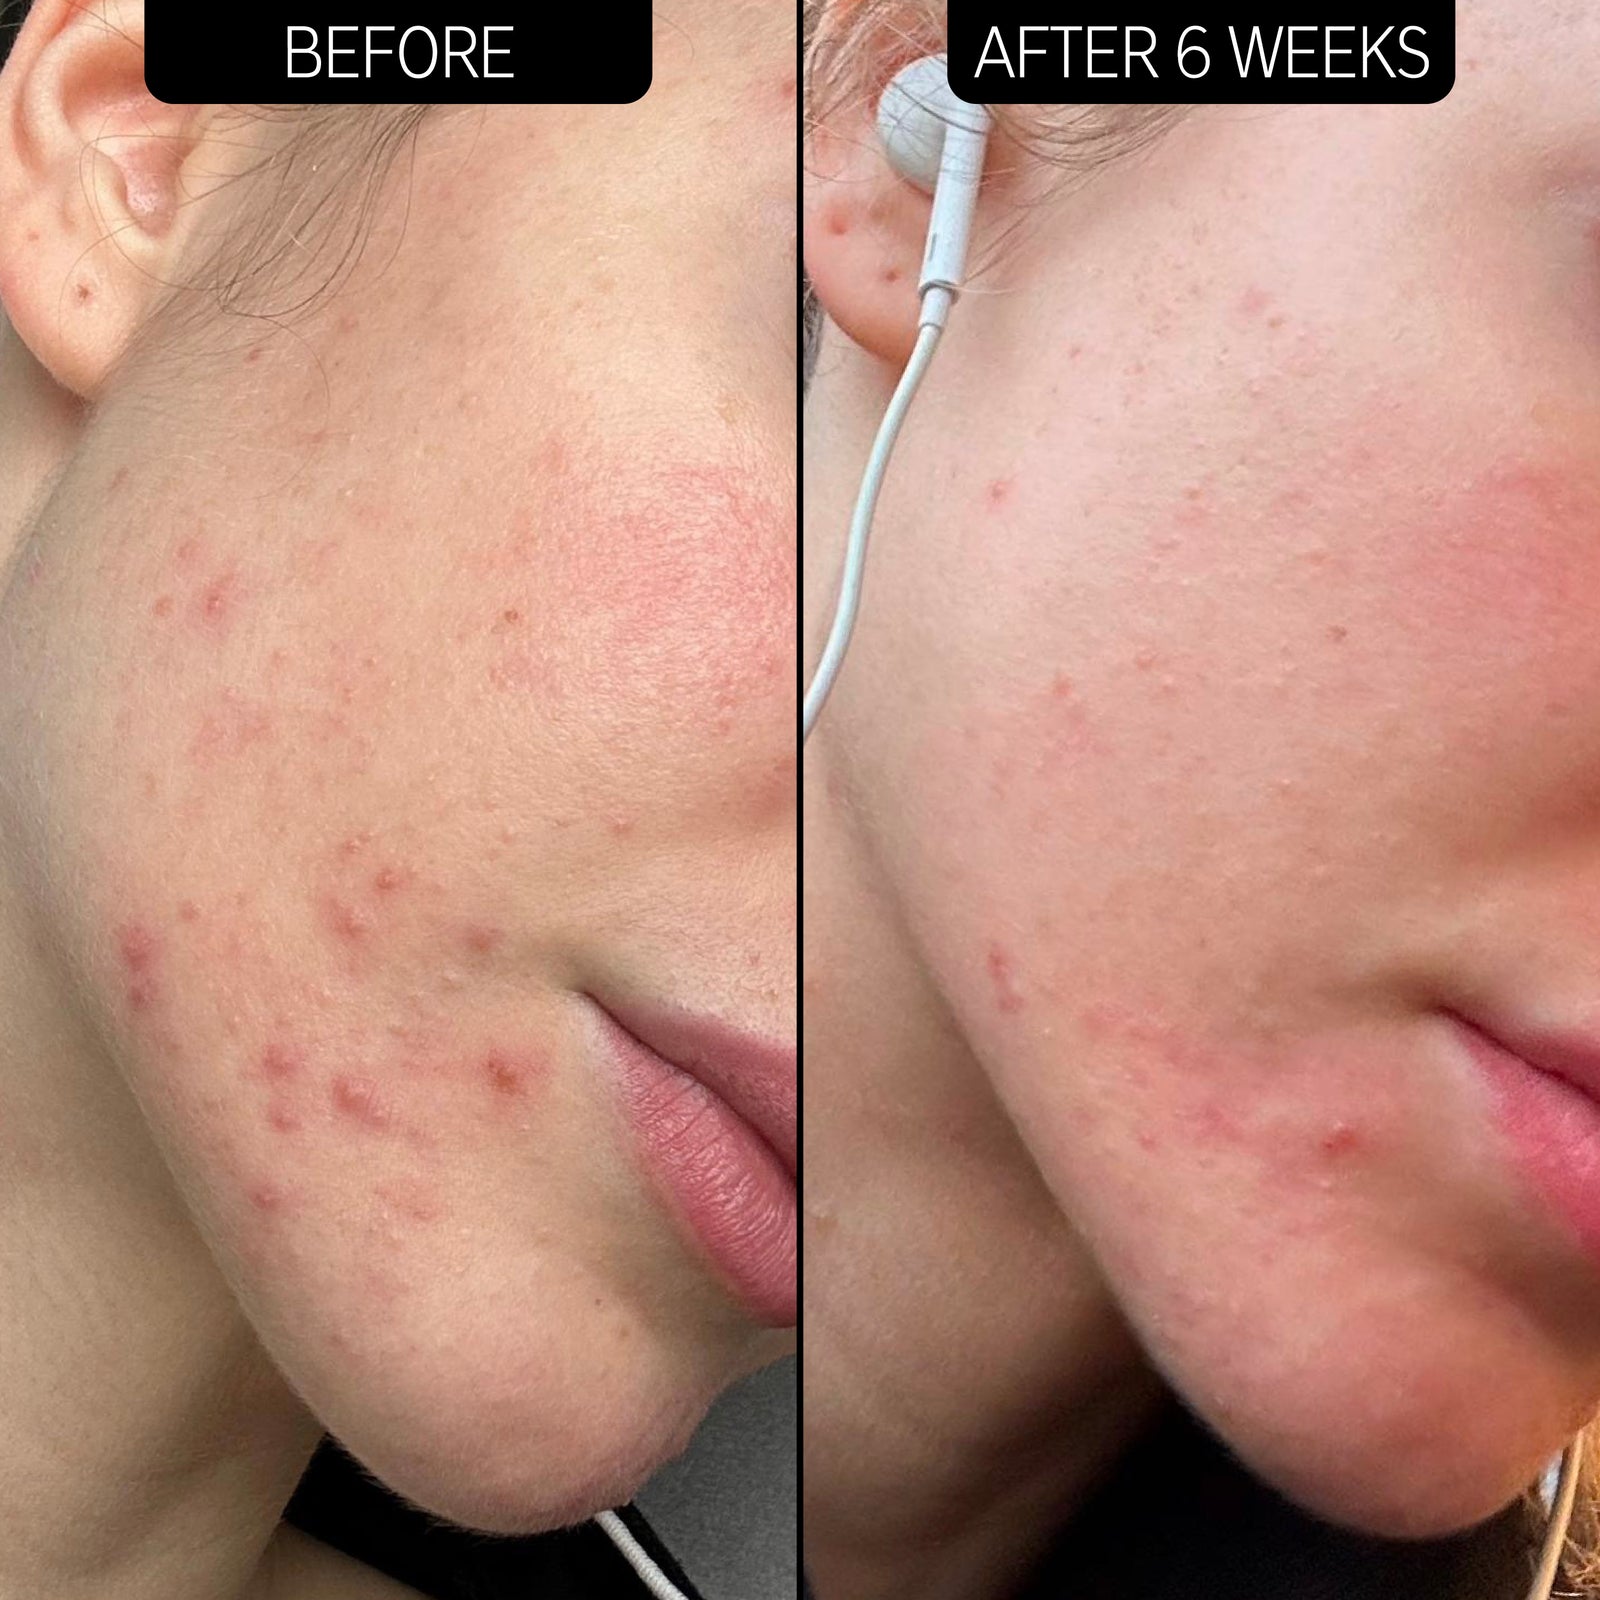 Before and after using Acne Solution Trio 6 weeks results displaying visible acne reduction